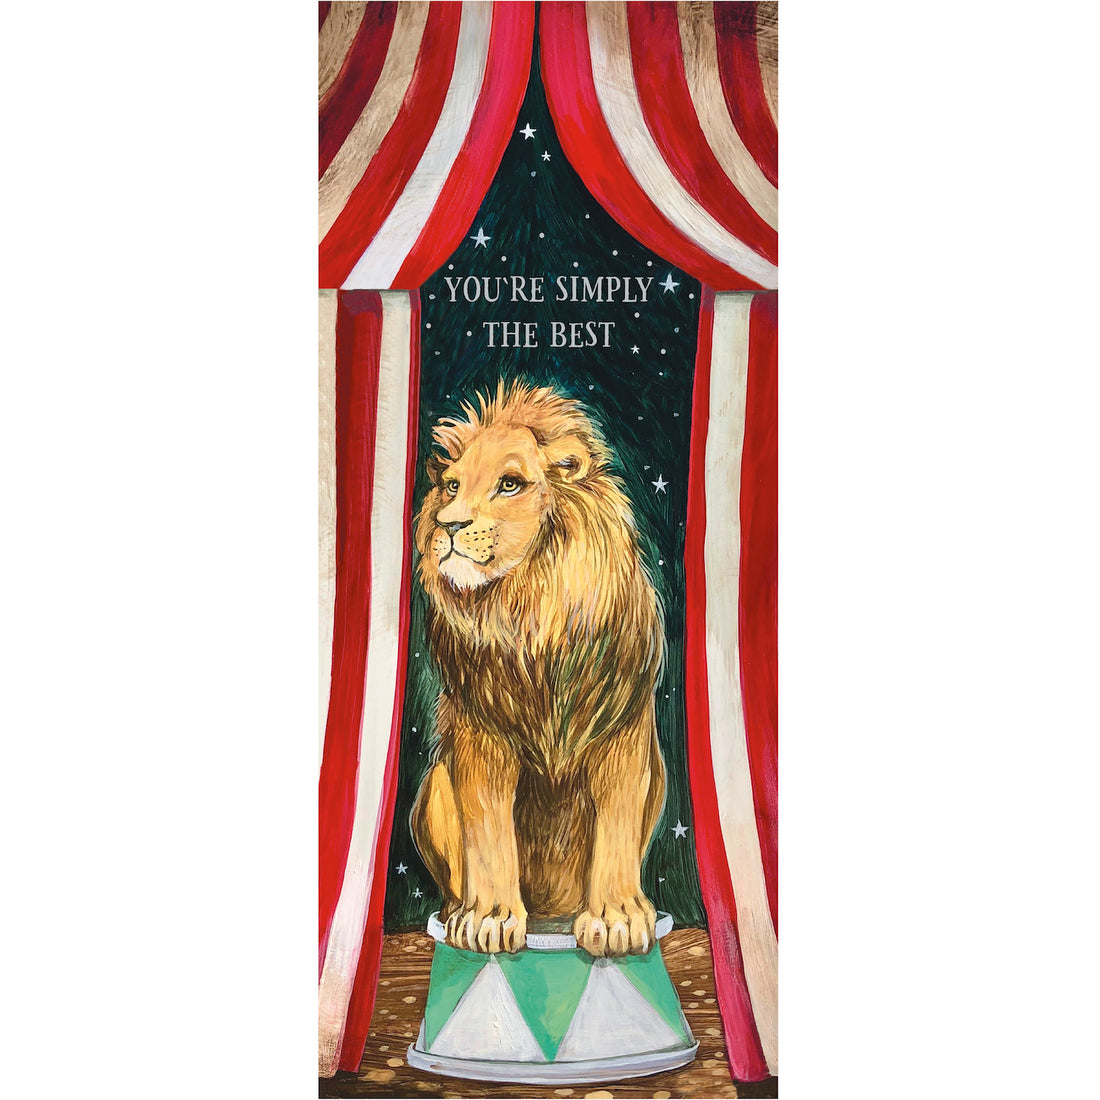 A whimsical illustration of a lion with a large mane sitting on a circus pedestal, surrounded by red and white striped curtains and a starry sky behind him, with the message &quot;YOU&